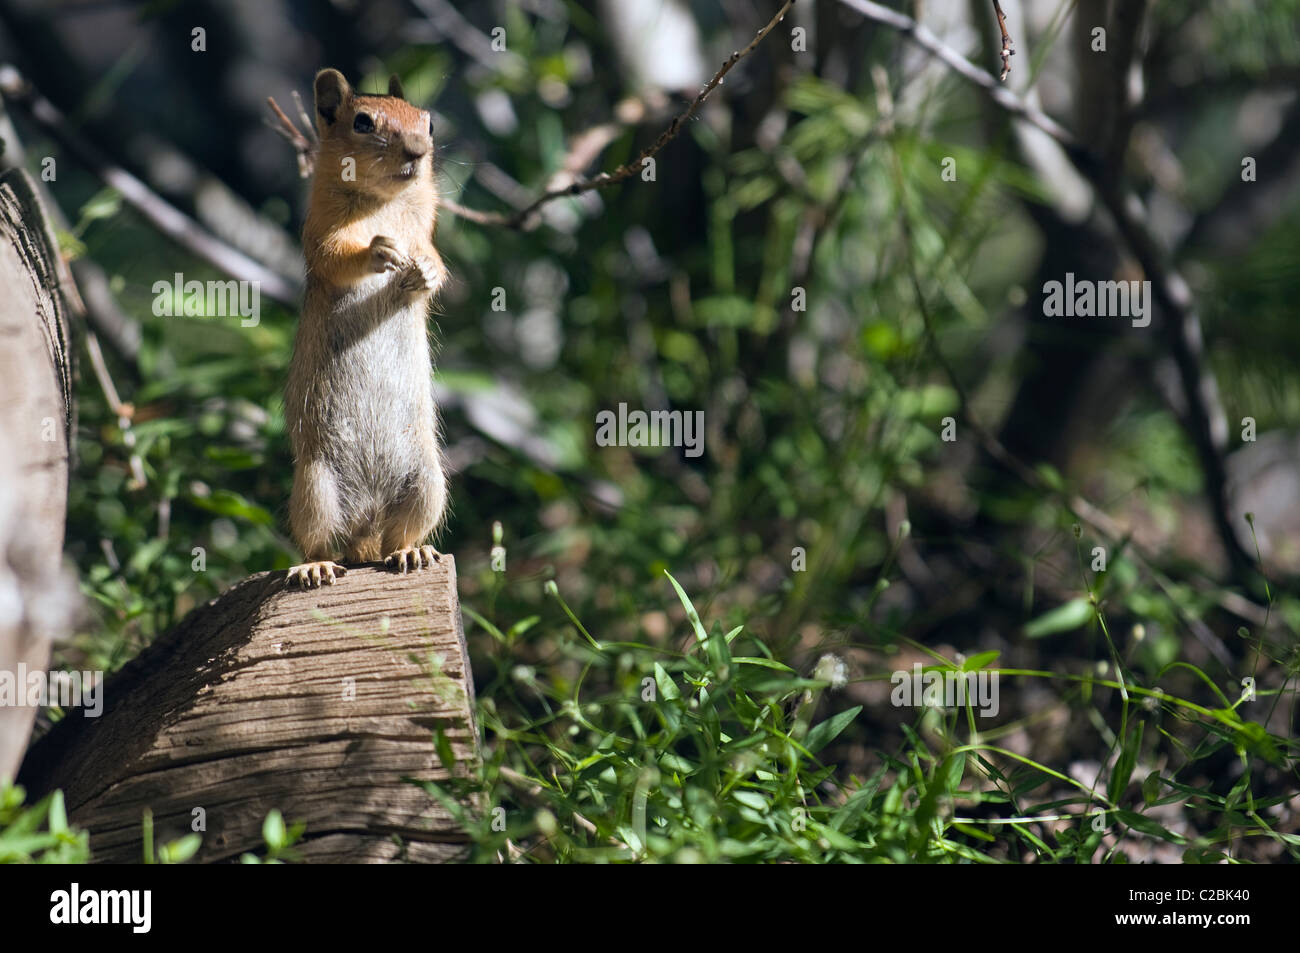 Golden-mantled ground squirrel watching guard. Stock Photo